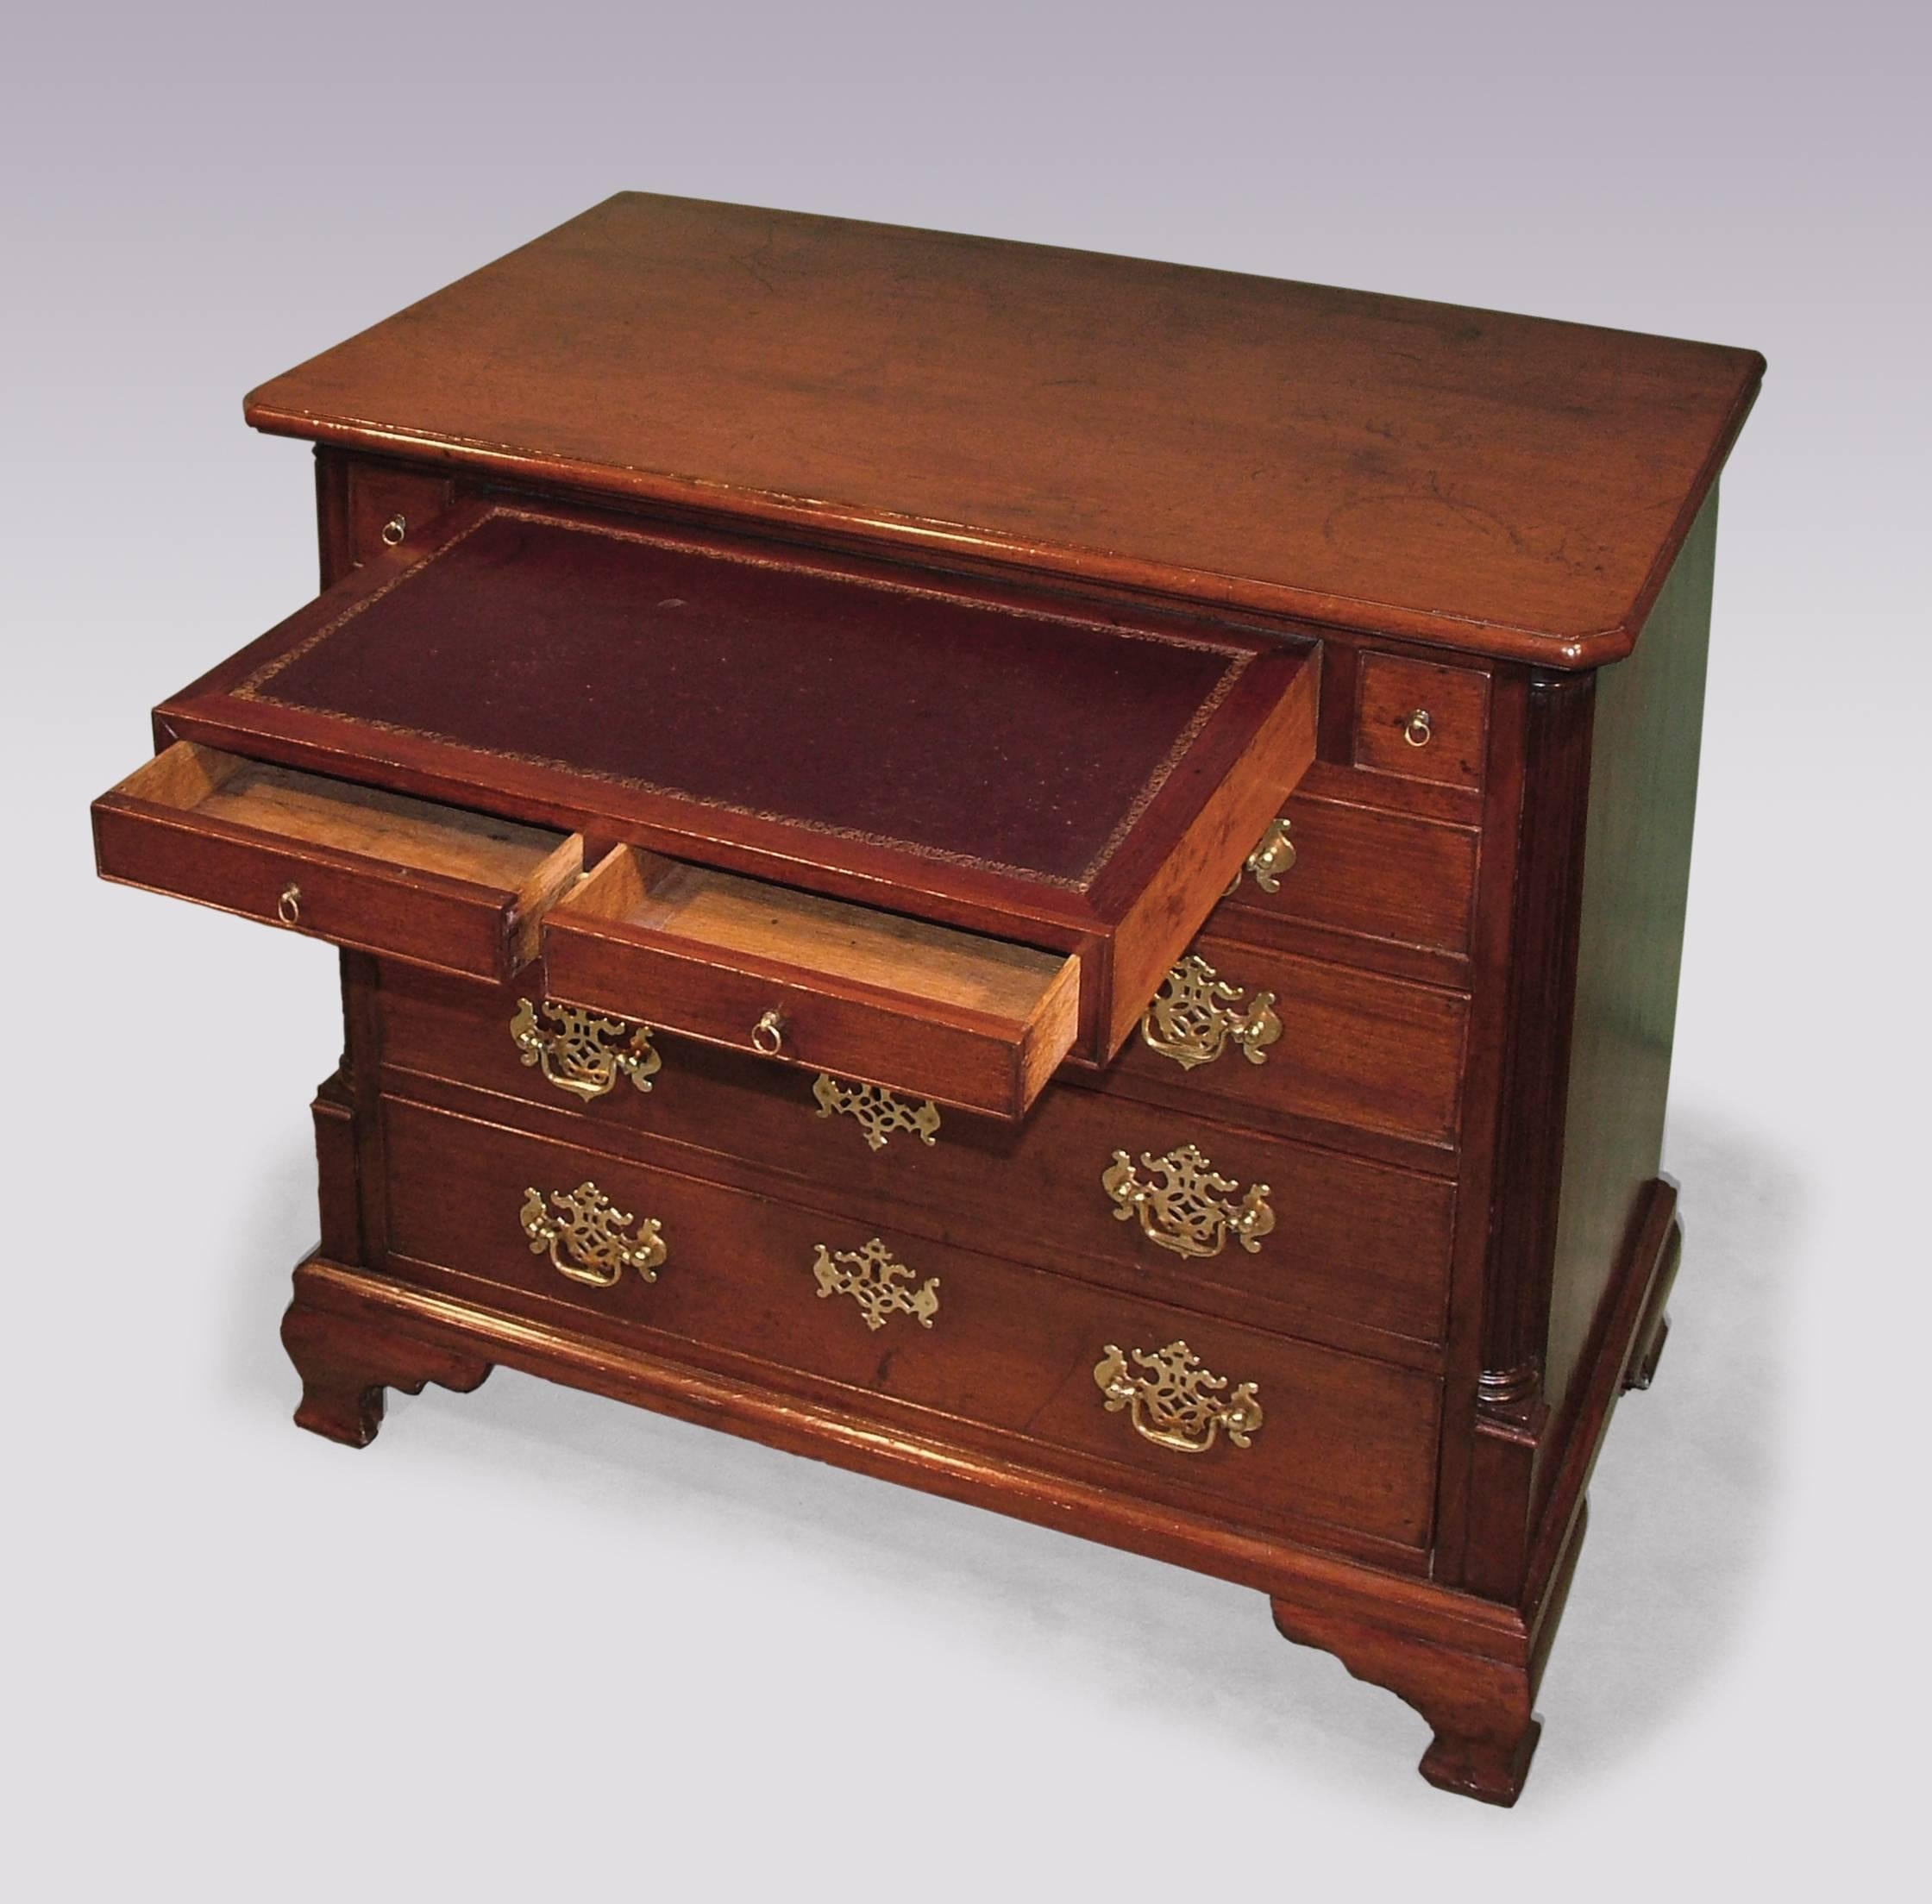 A mid-18th century George III period mahogany chest, having moulded edged, canted cornered top above graduated drawers and unusual double leather top writing drawer, flanked by fluted quadrant corners, supported on ogee bracket feet.